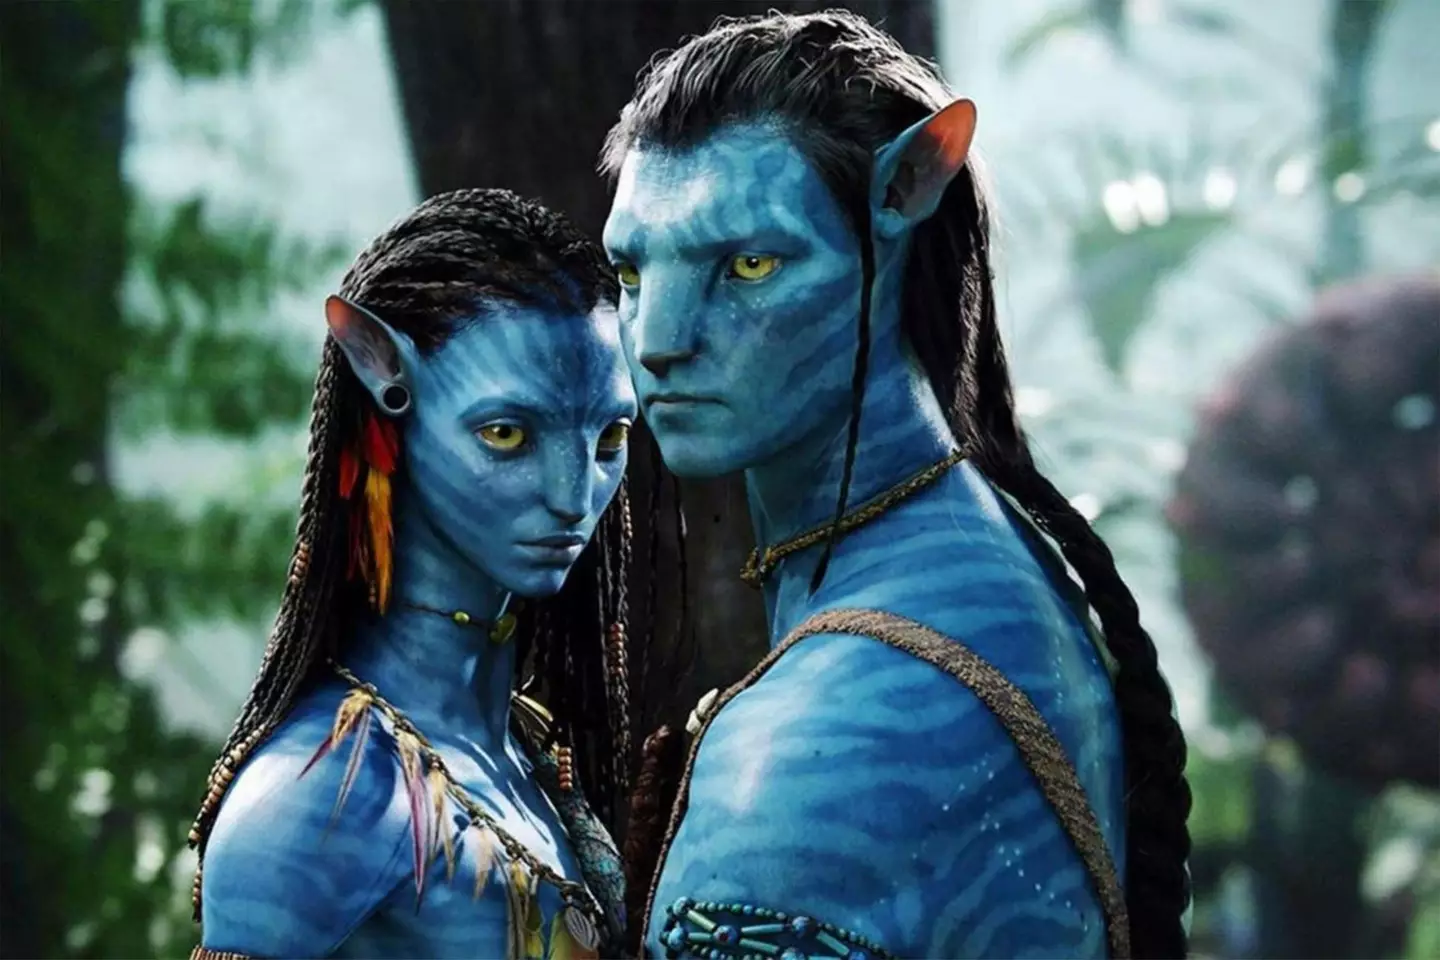 Disney is being called out for removing Avatar from its streaming service.